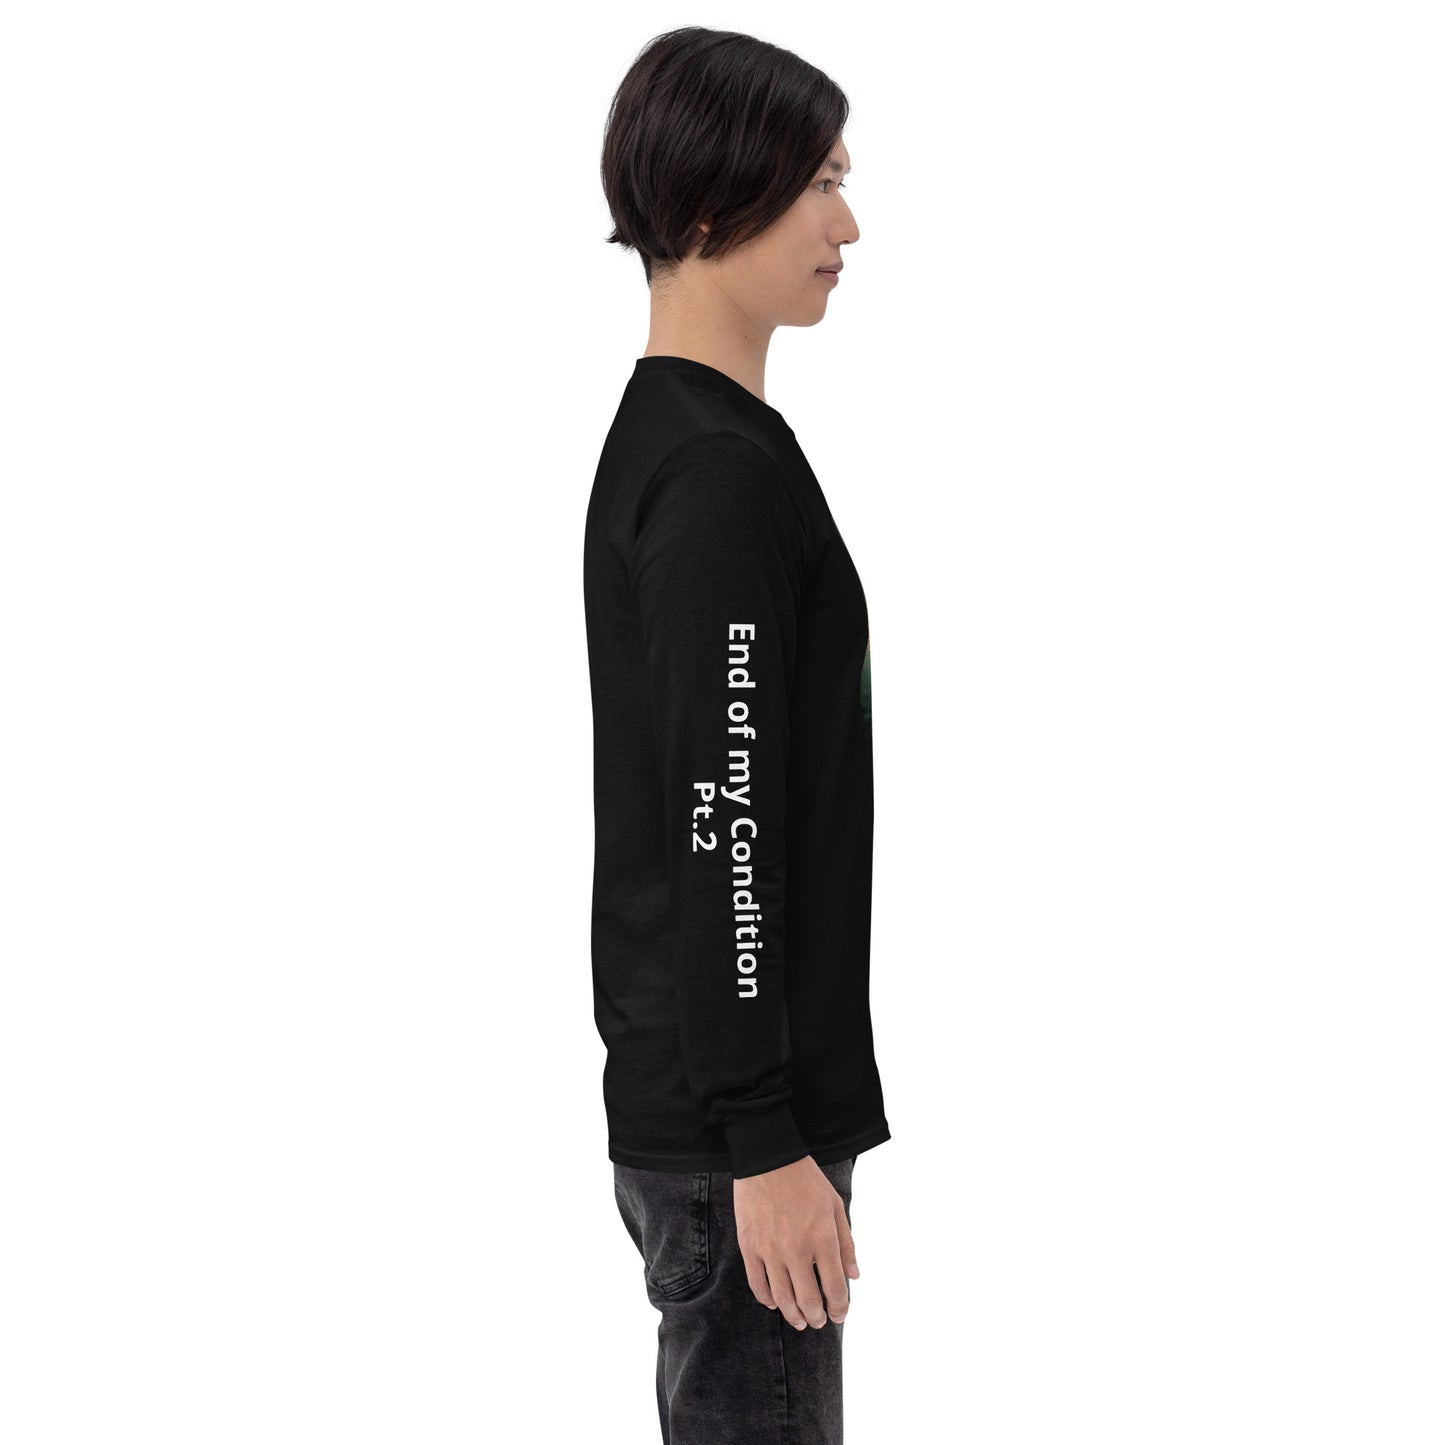 9/12 End of my Condition Pt.2 Long Sleeve Shirt